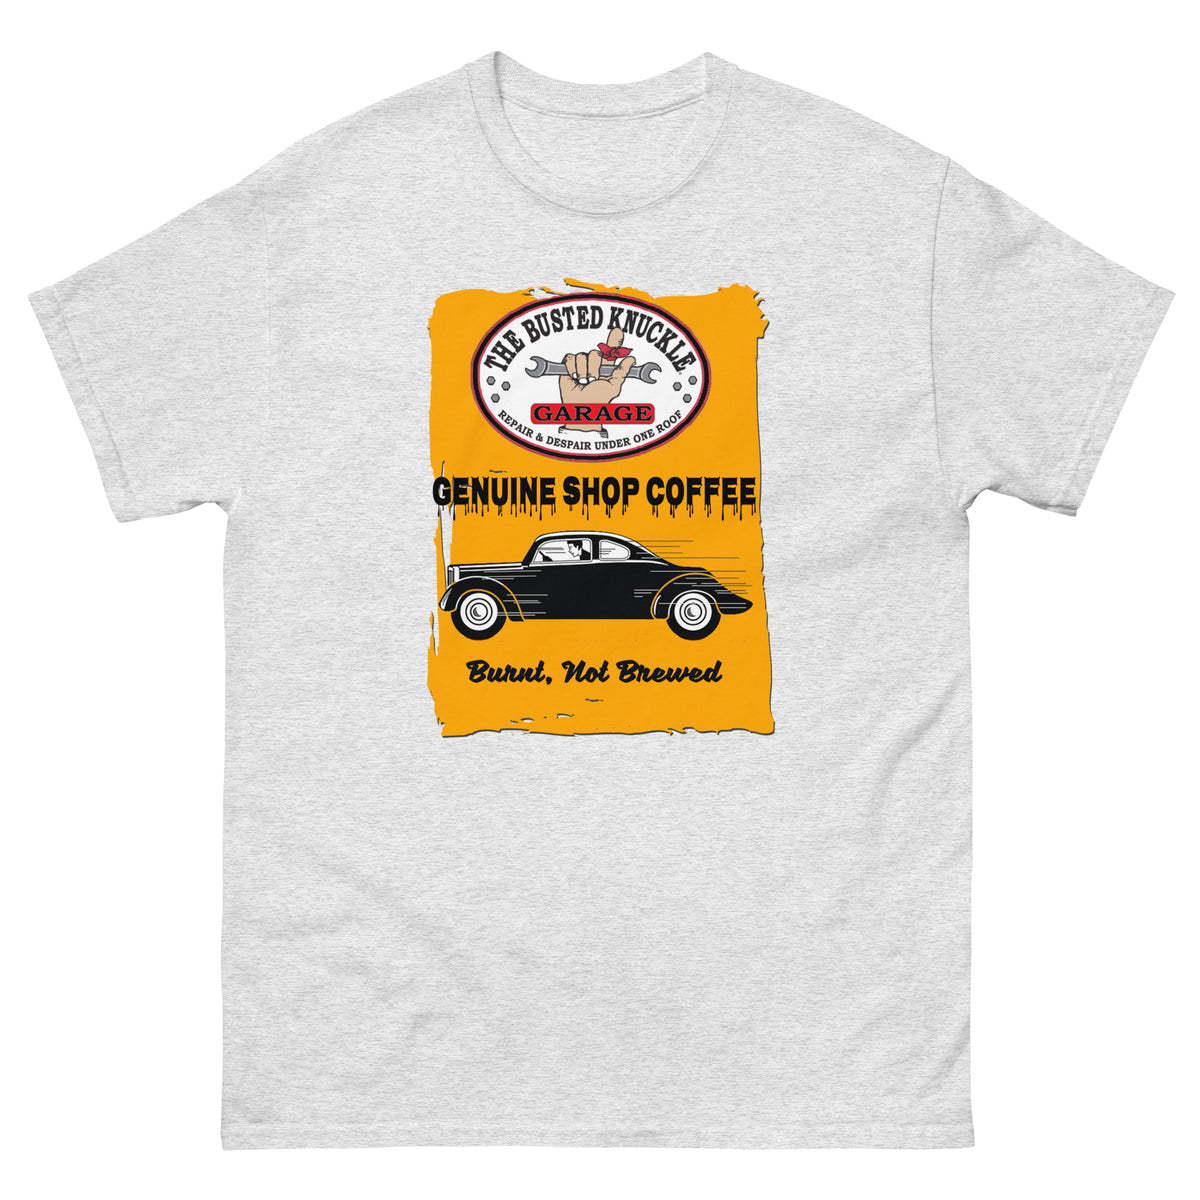 Busted Knuckle Garage Shop Coffee T-Shirt